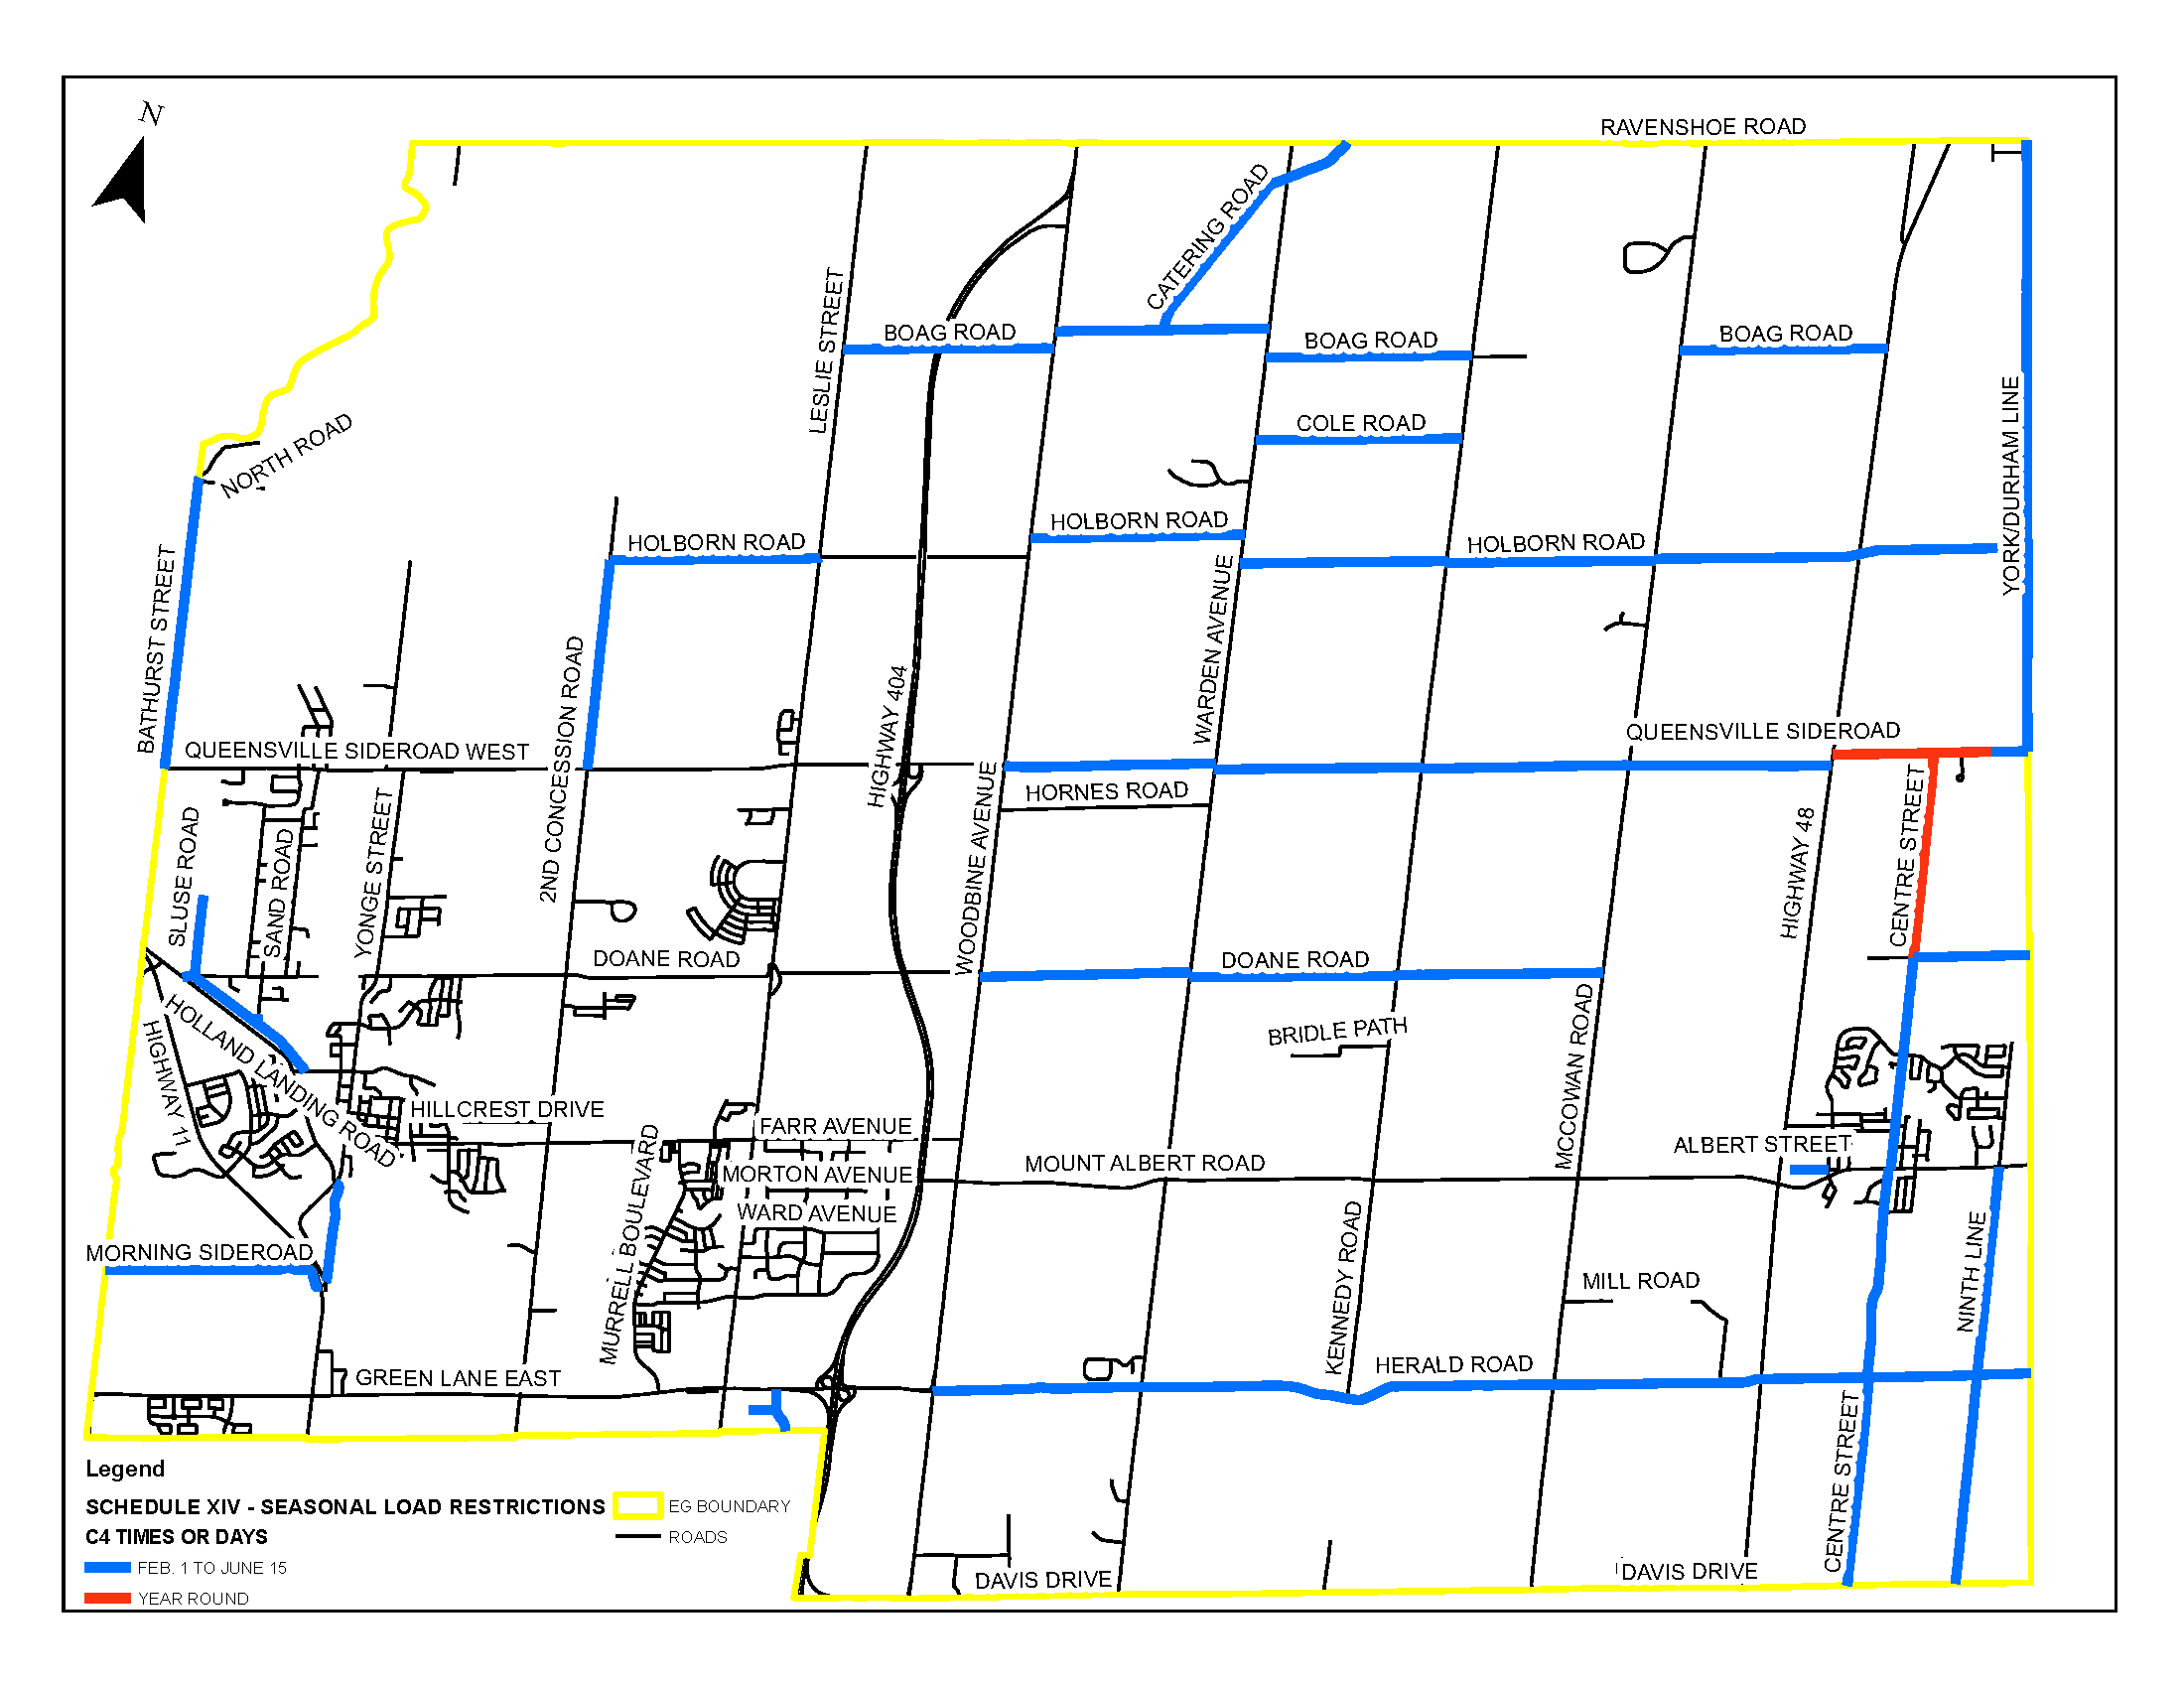 Road restrictions map